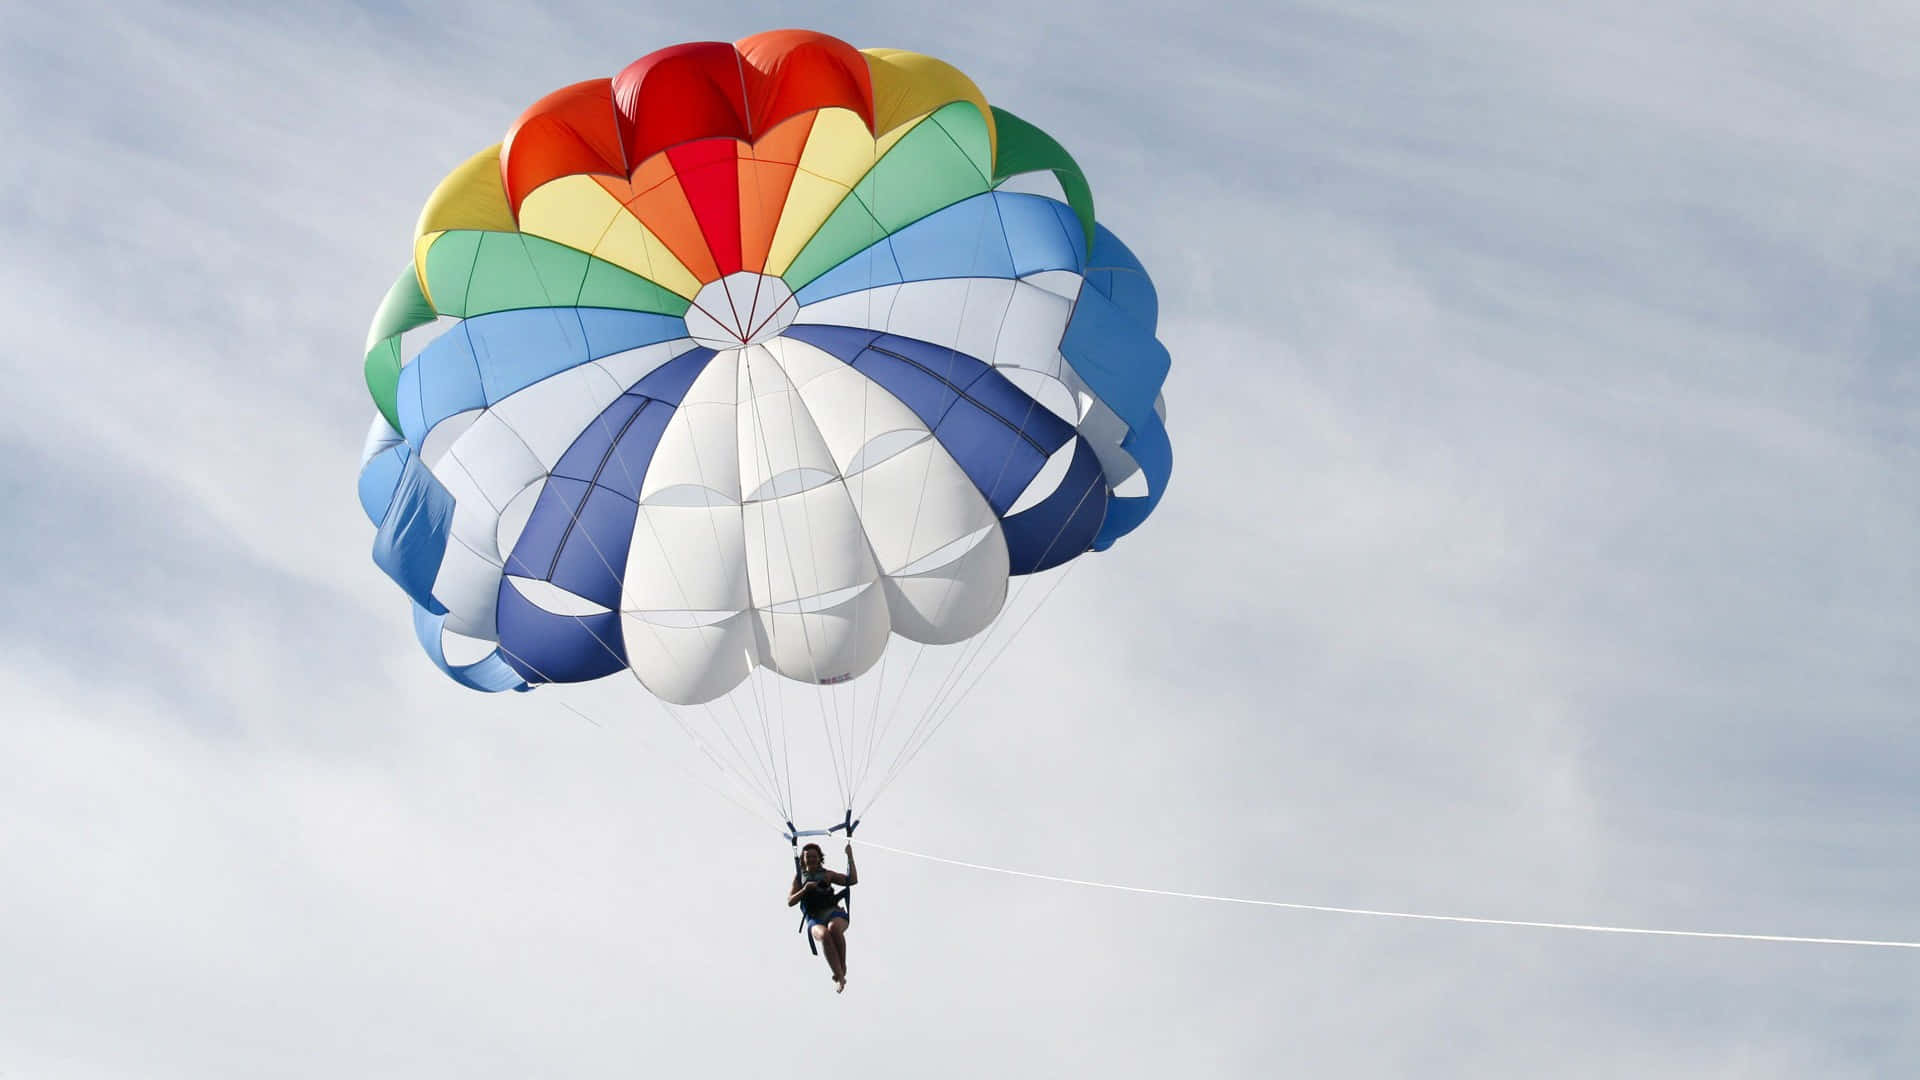 Colorful Parachute Skydiving Background